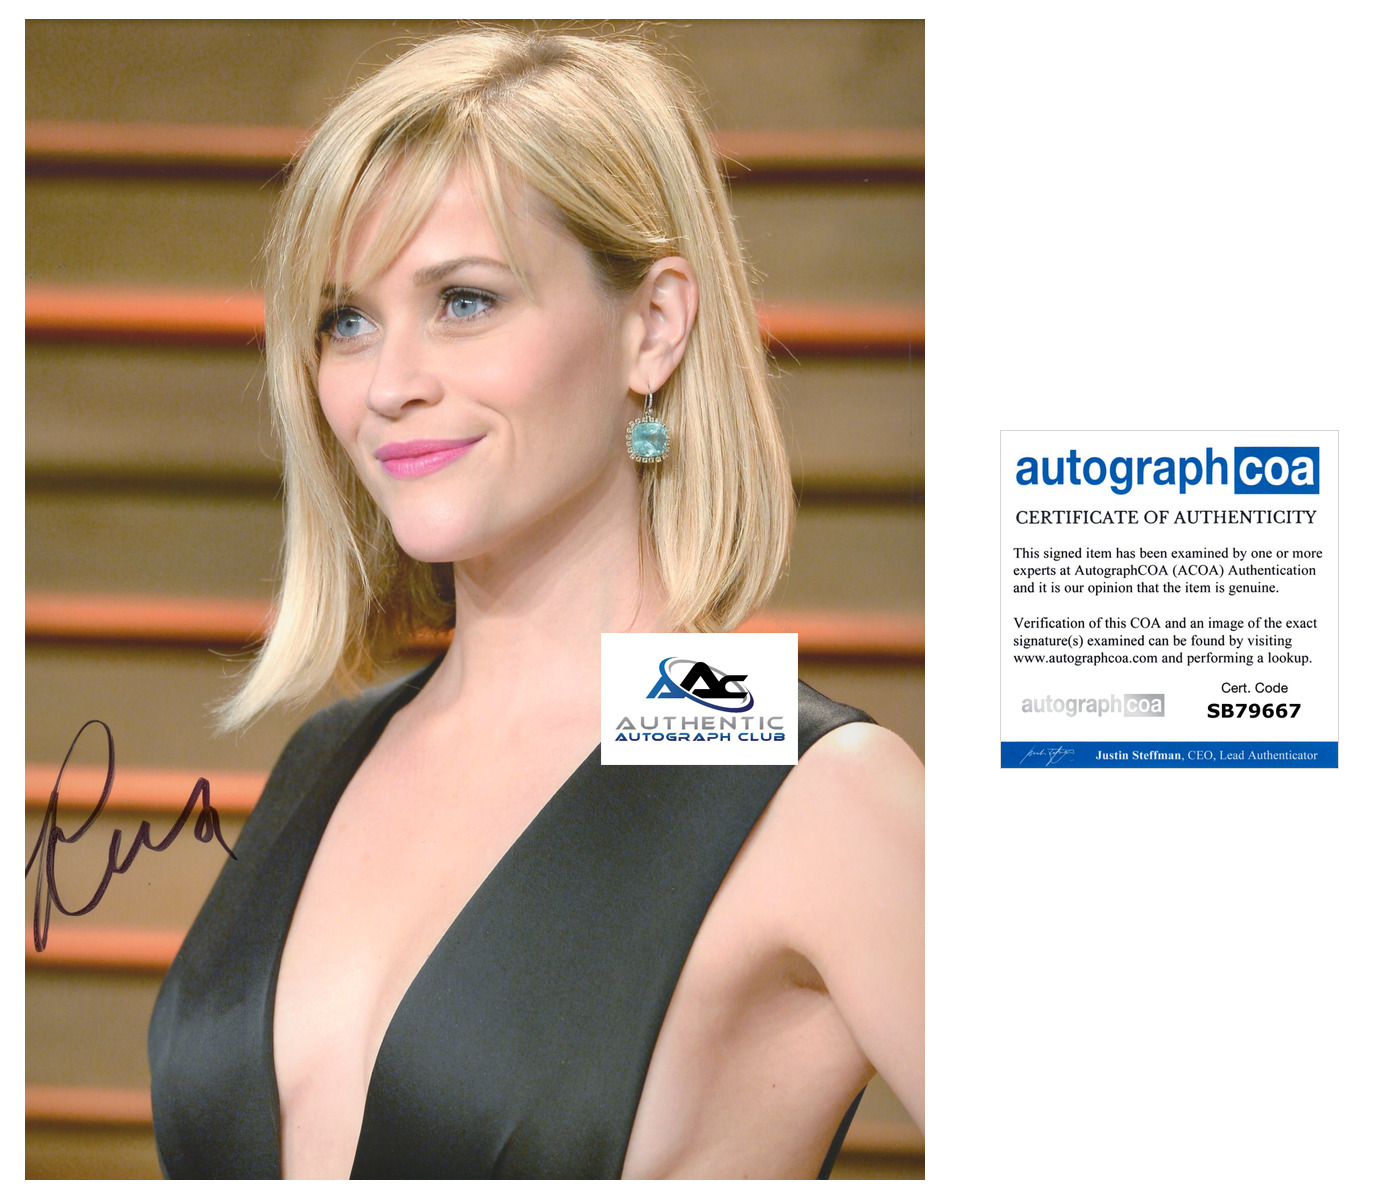 REESE WITHERSPOON AUTOGRAPH SIGNED 8X10 PHOTO ACOA